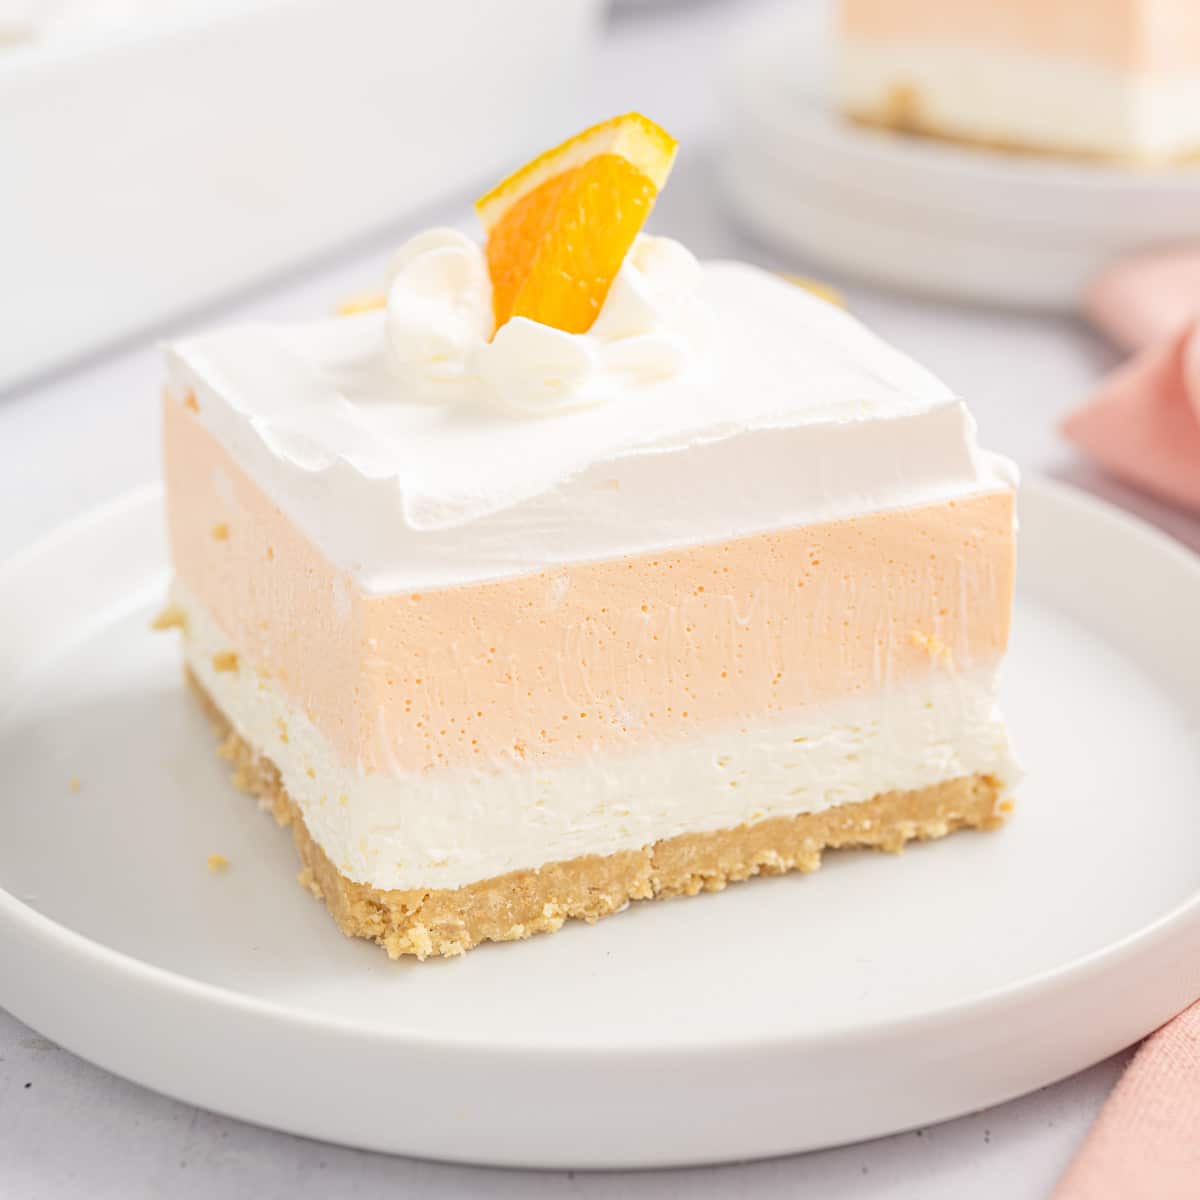 A slice of orange Creamsicle bars on a white plate topped with a slice of orange.